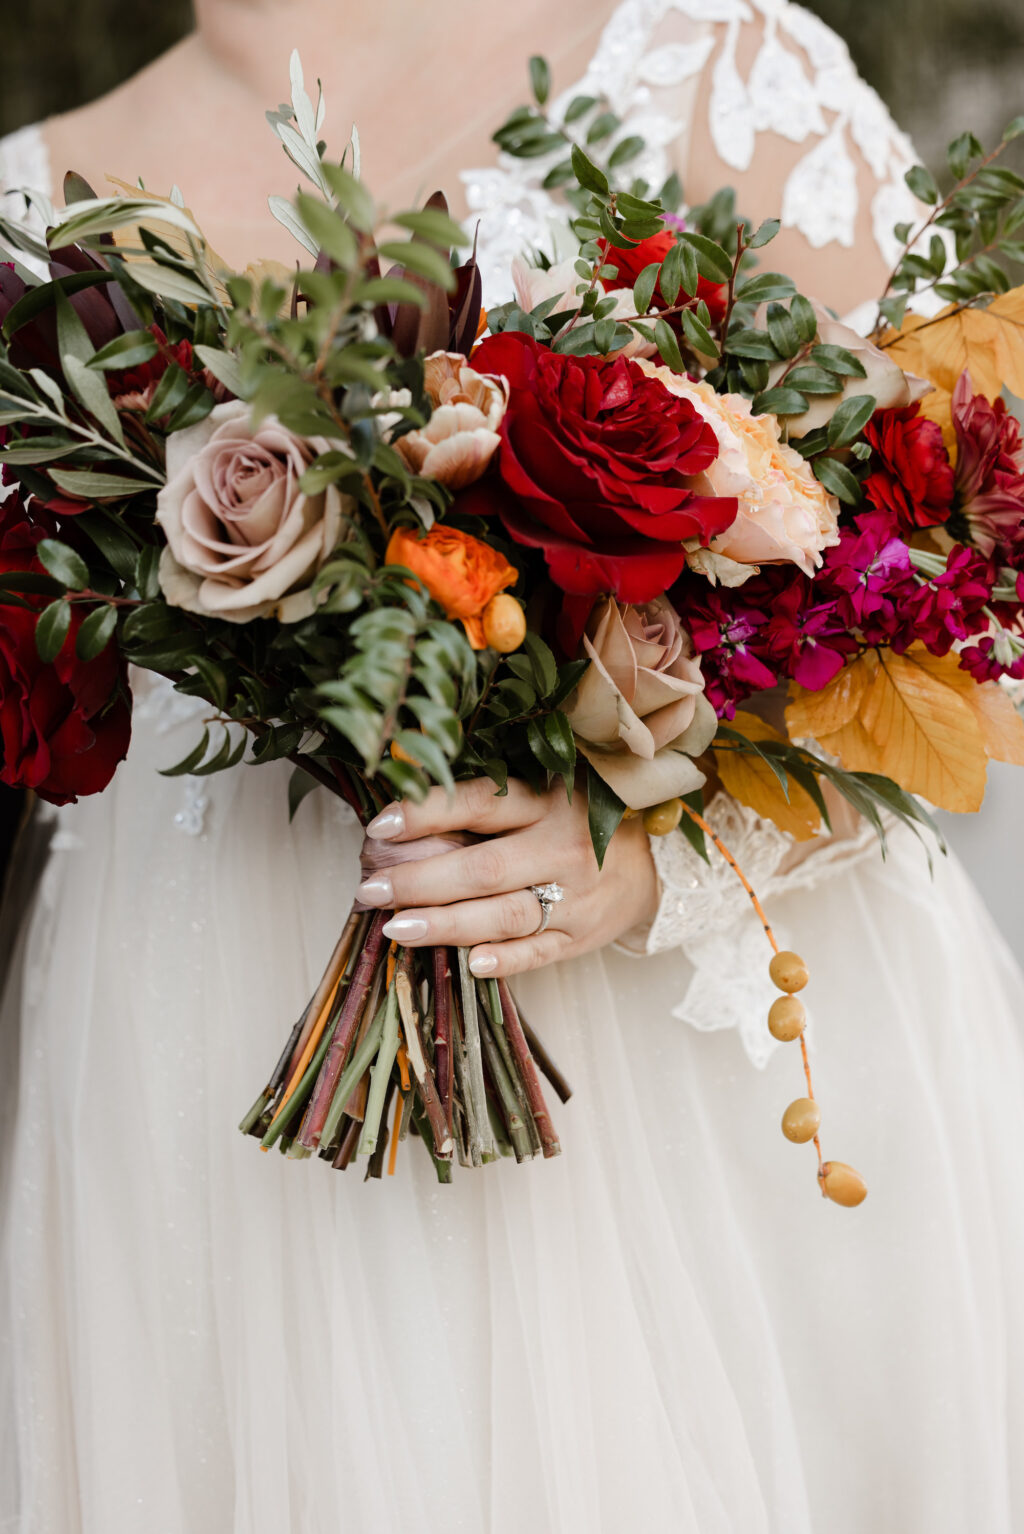 Brown Leaf, Maroon, Purple, and Orange Roses, Stock, Hypernicum Berry, and Greenery Bouquet Ideas | Dark and Moody Winter Wedding Inspiration